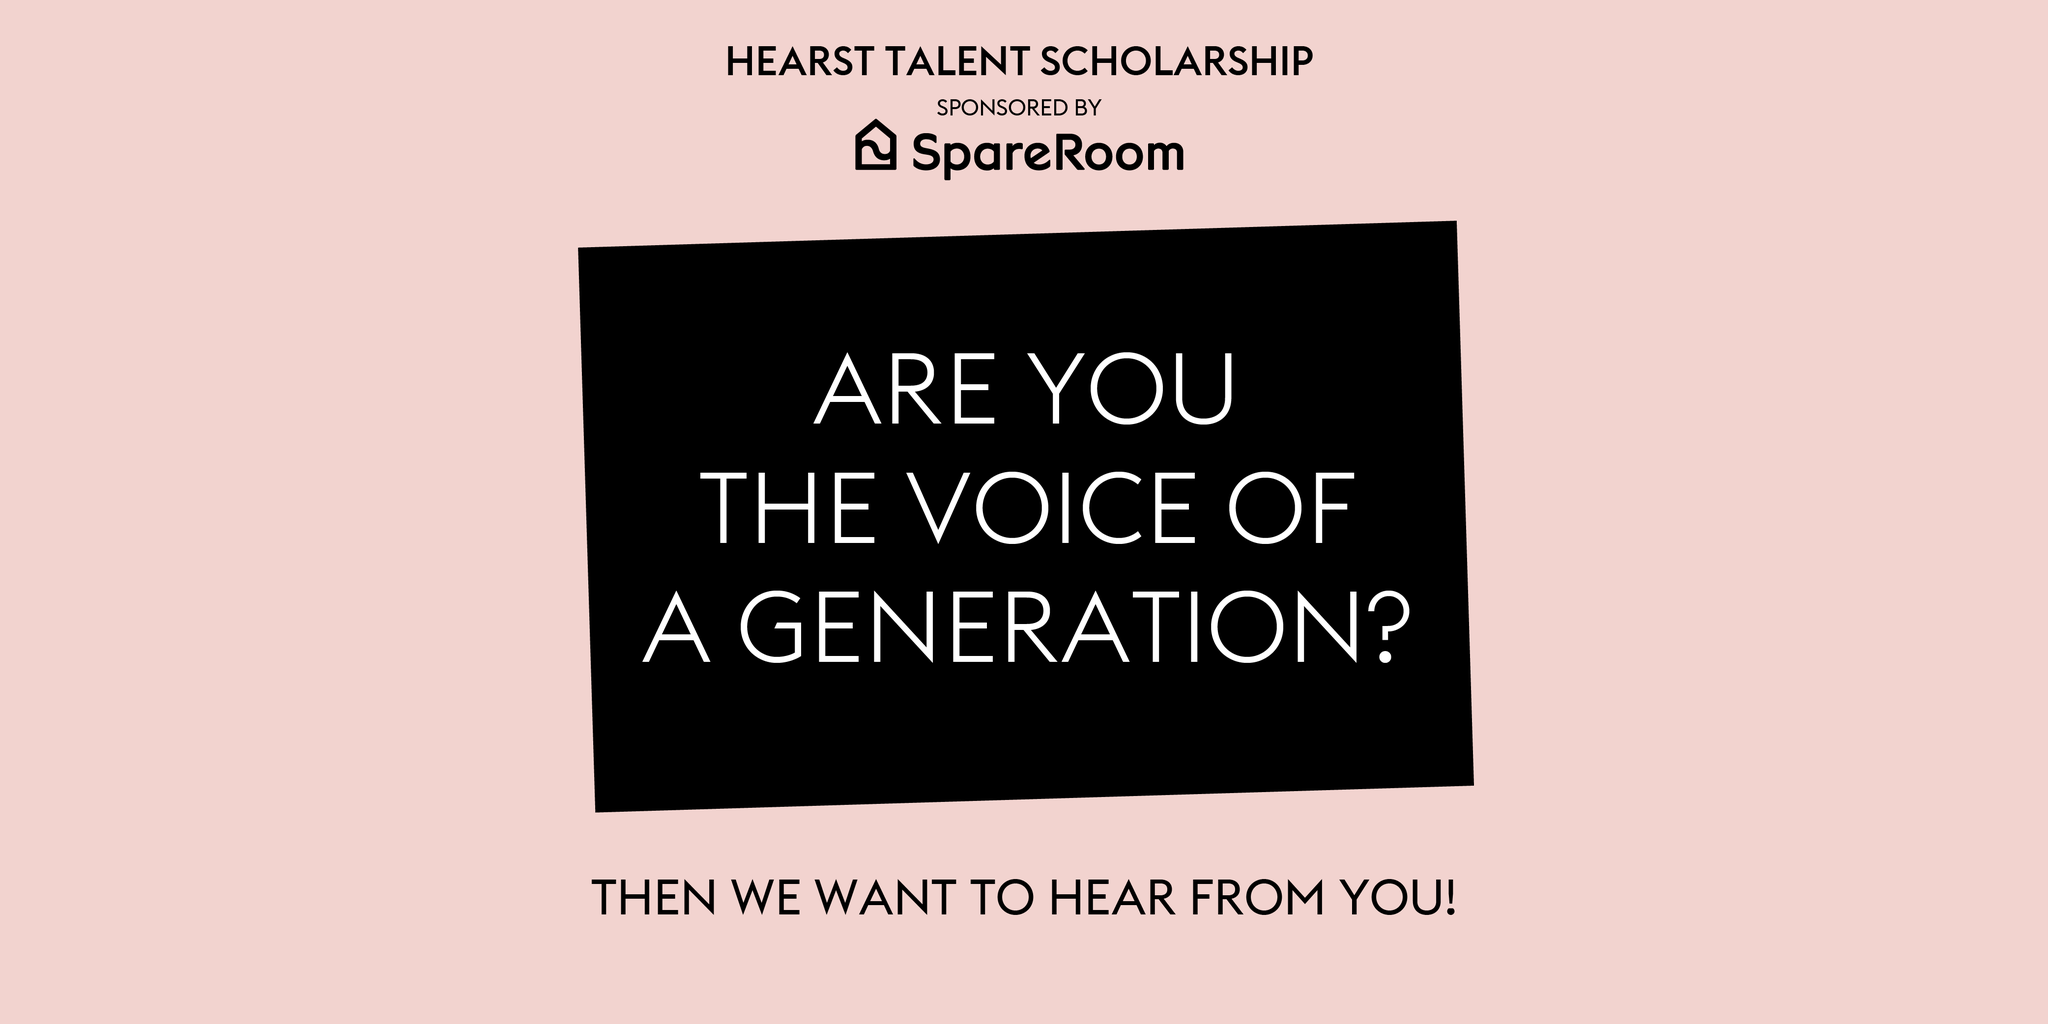 enter the hearst talent scholarship now